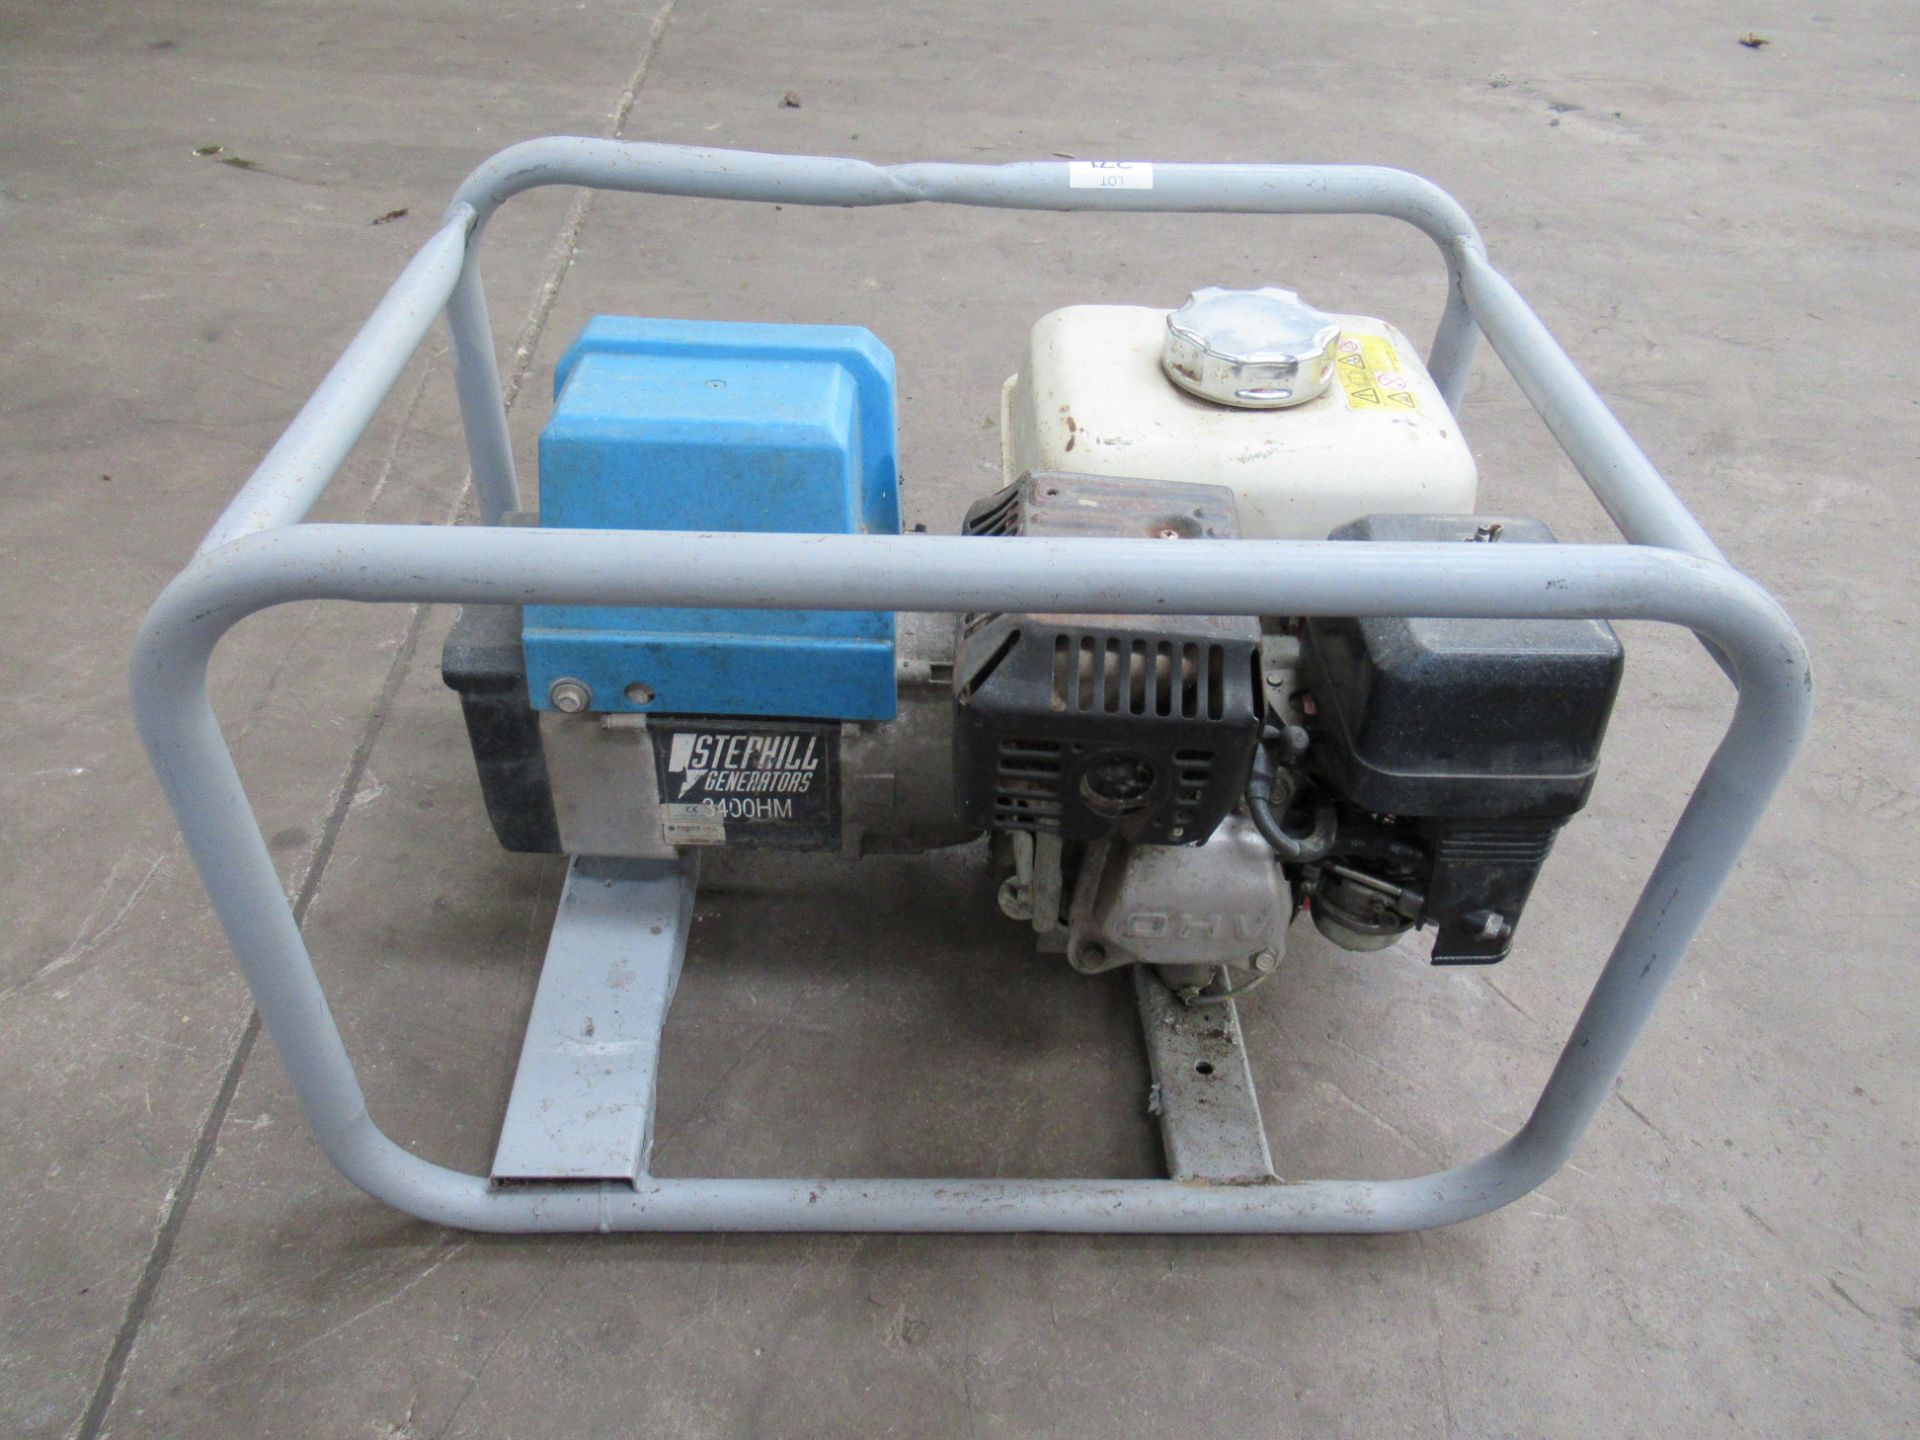 A Stephill 3400HM 110V Generator - Image 4 of 5